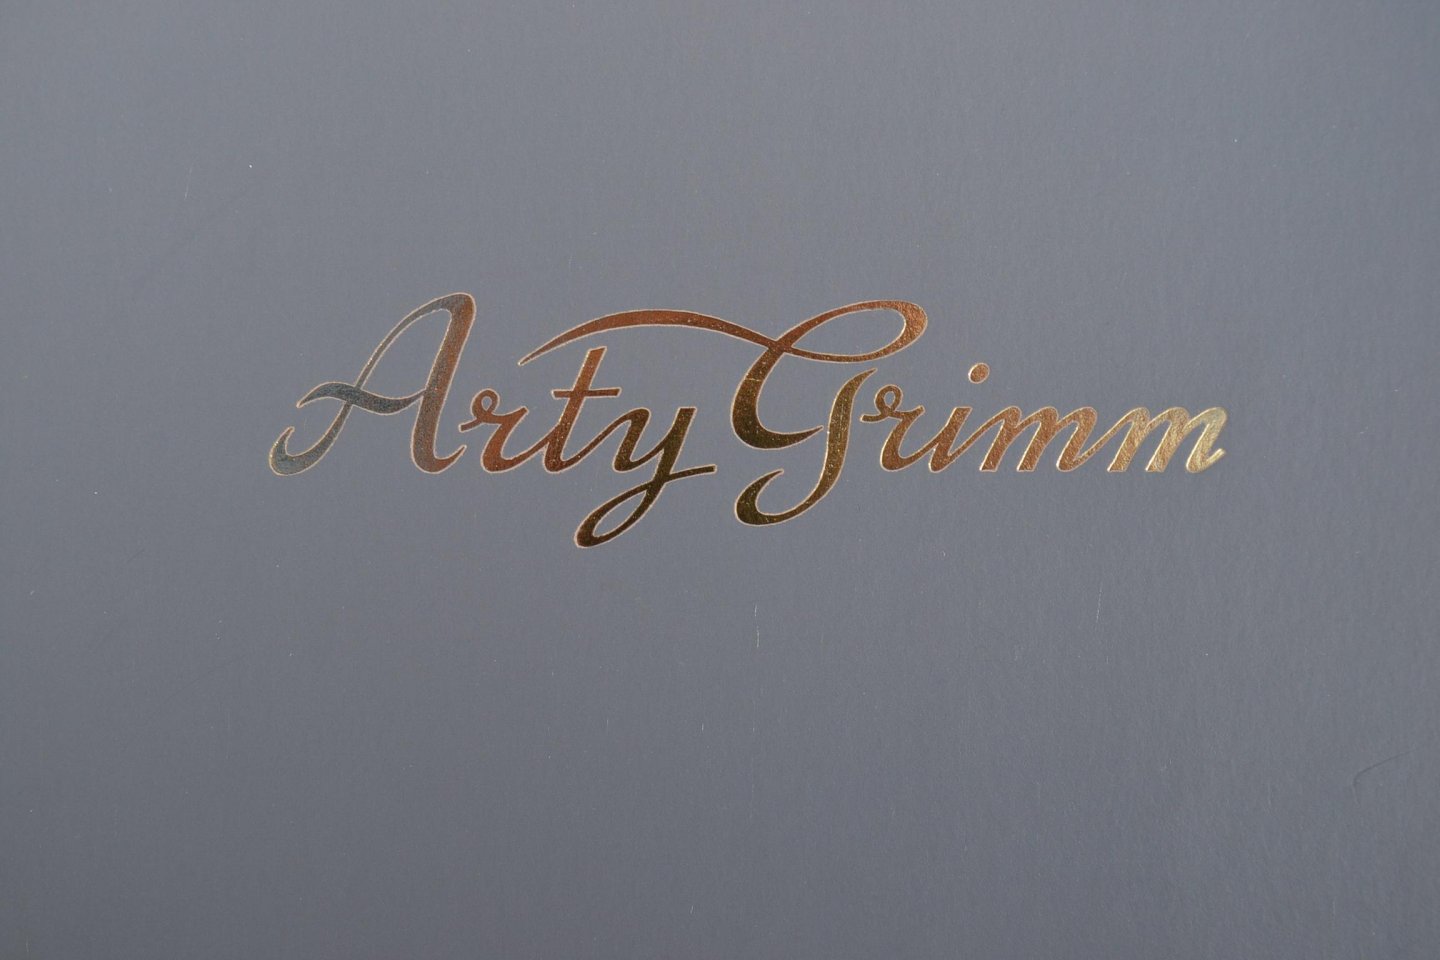 Grimm, Arty - Arty Grimm